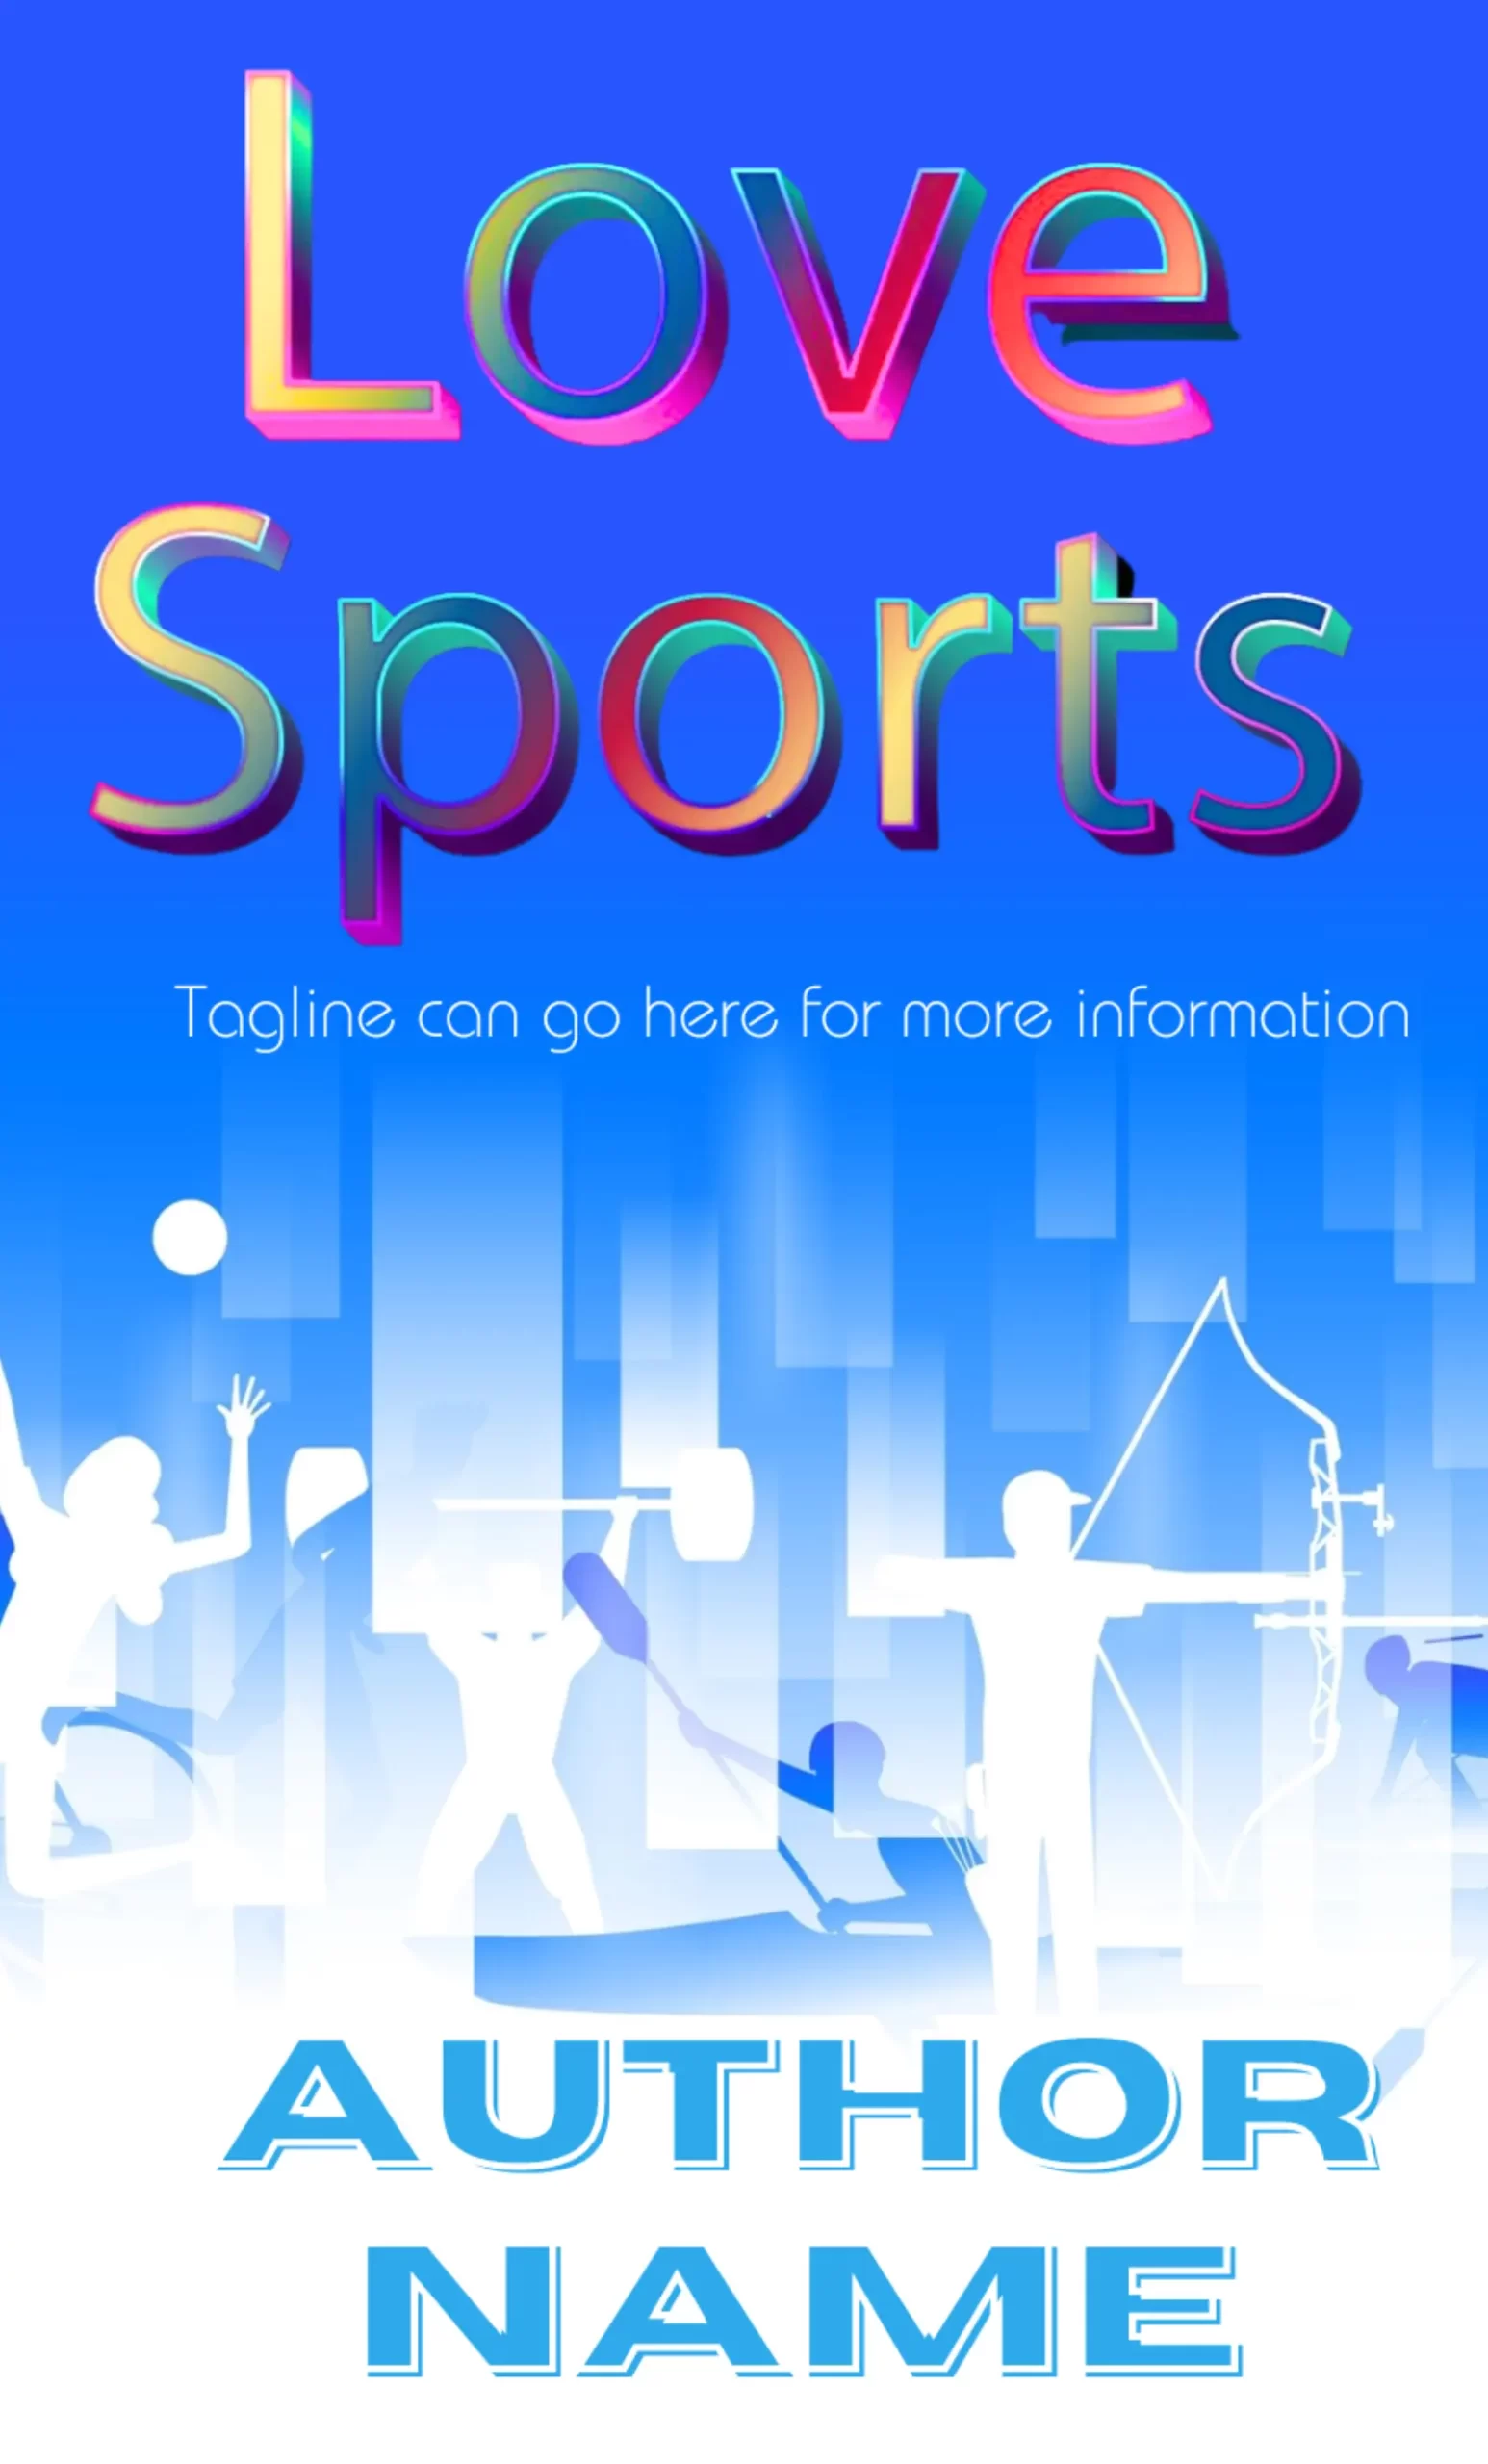 Premade book cover illustration of people playing various sports